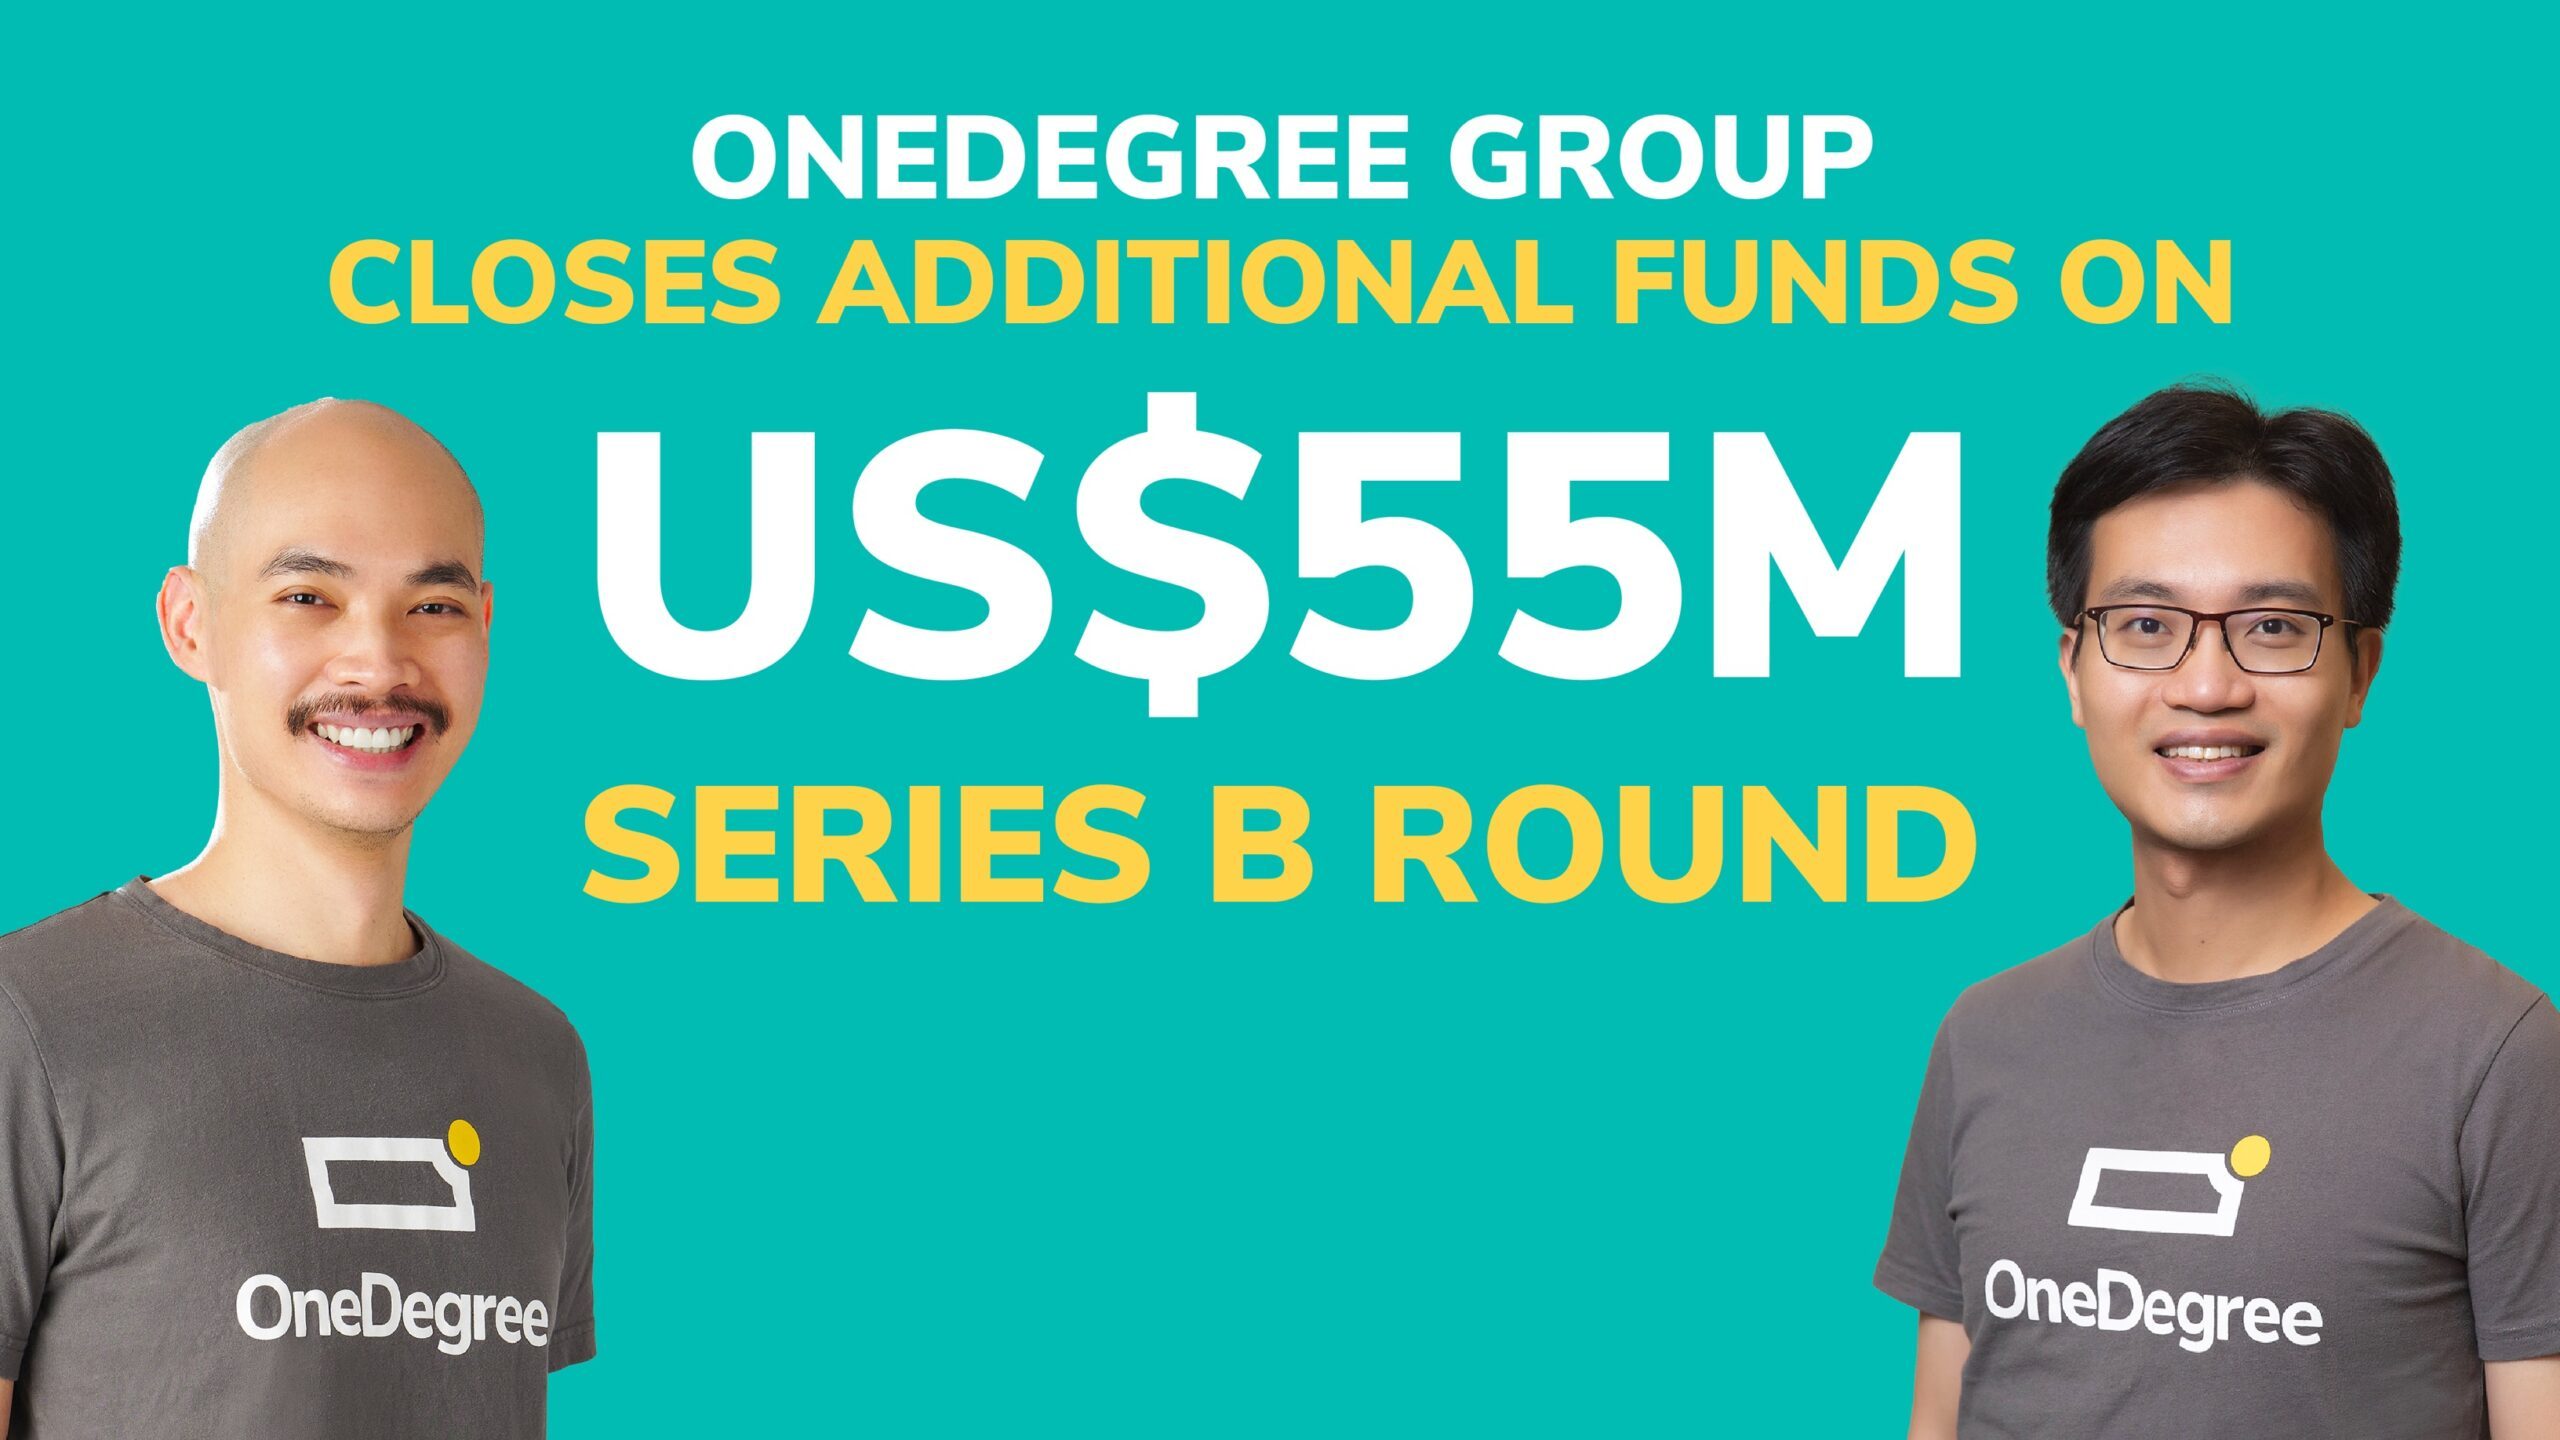 Hong Kong insurtech firm OneDegree closes Series B round at $55m